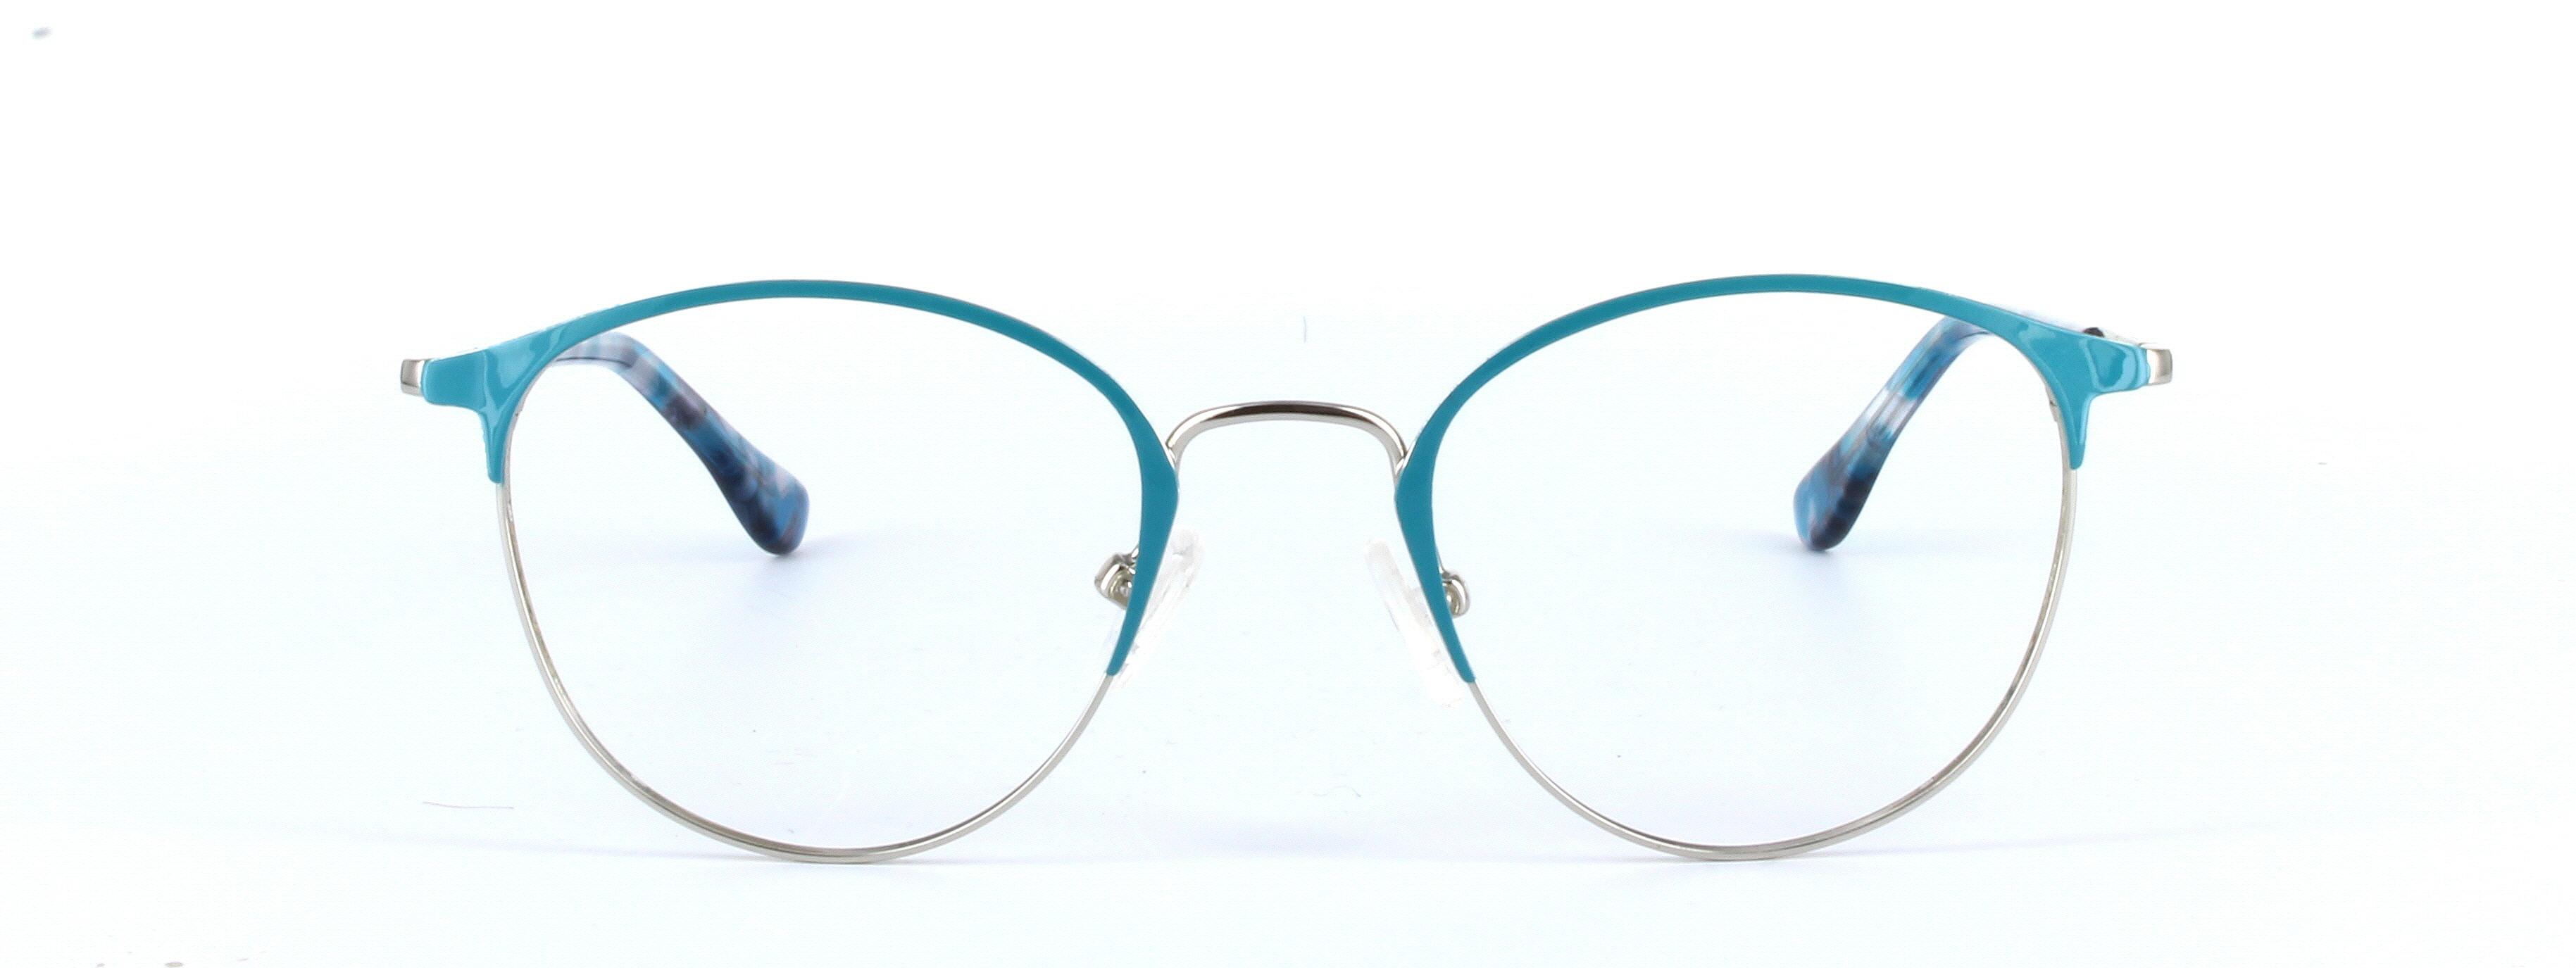 Mia Blue and Silver Full Rim Oval Round Metal Glasses - Image View 5